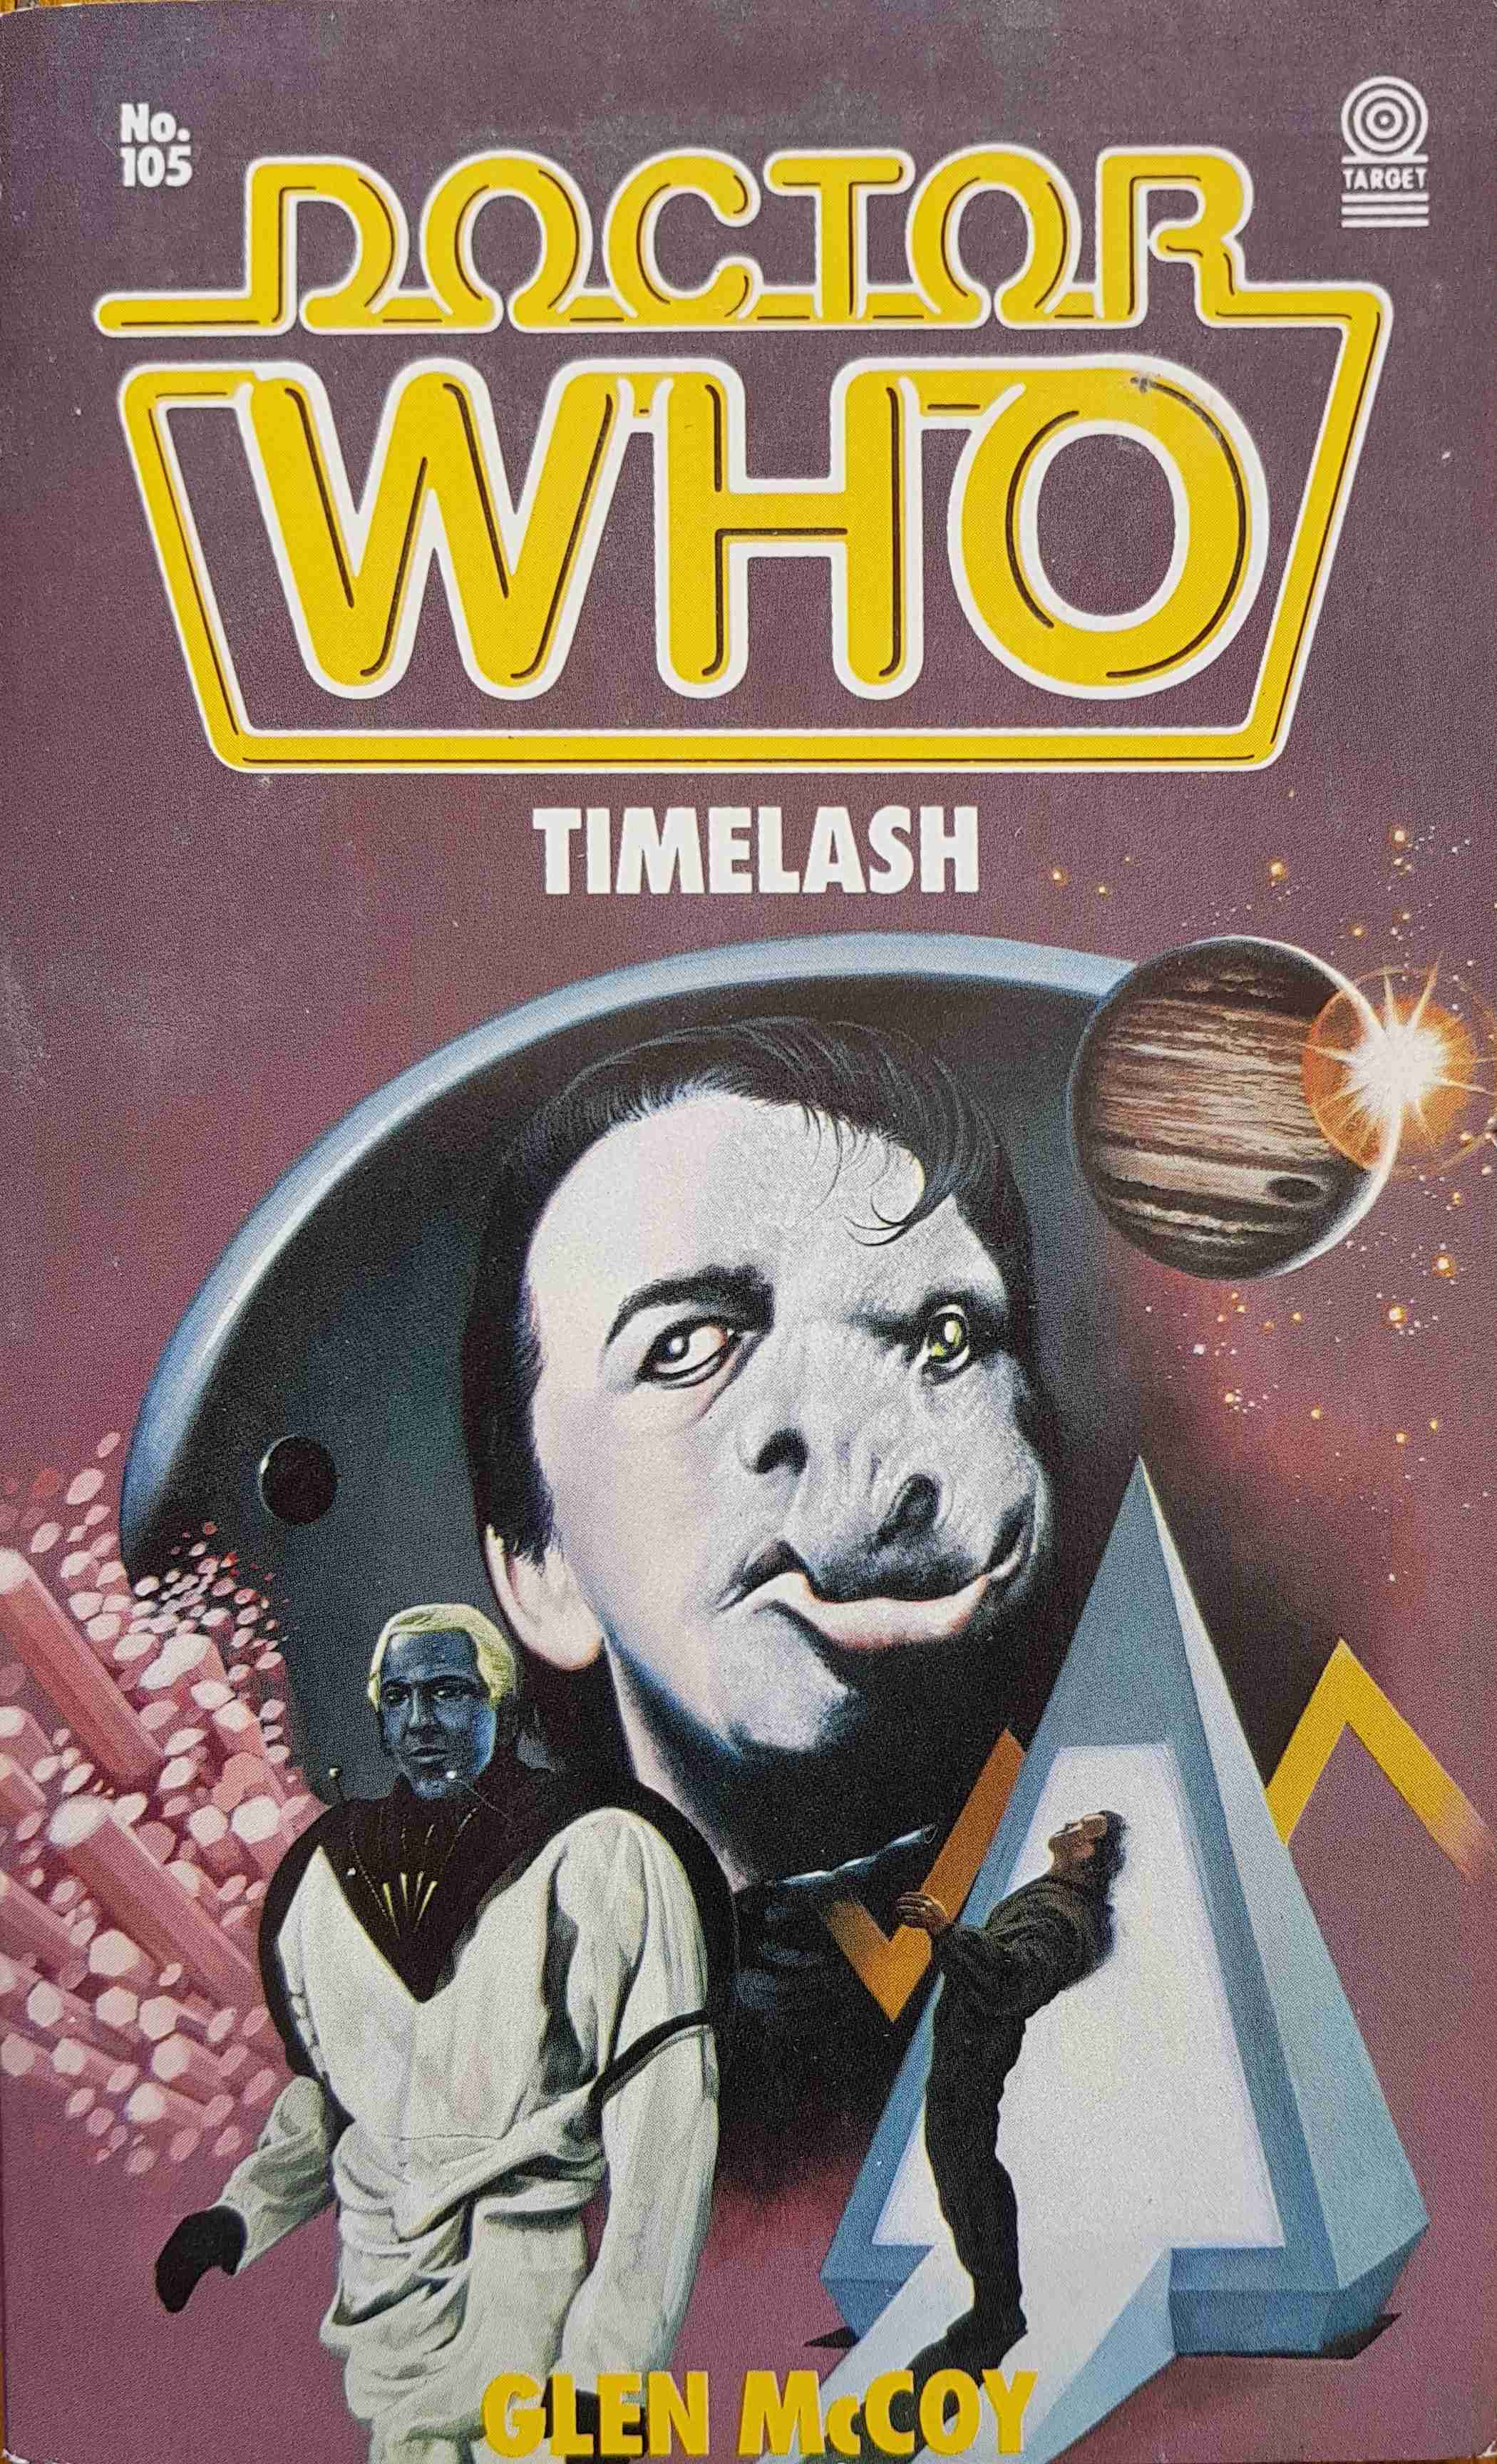 Picture of 0-426-20229-5 Doctor Who - Timelash by artist Glen McCoy from the BBC records and Tapes library